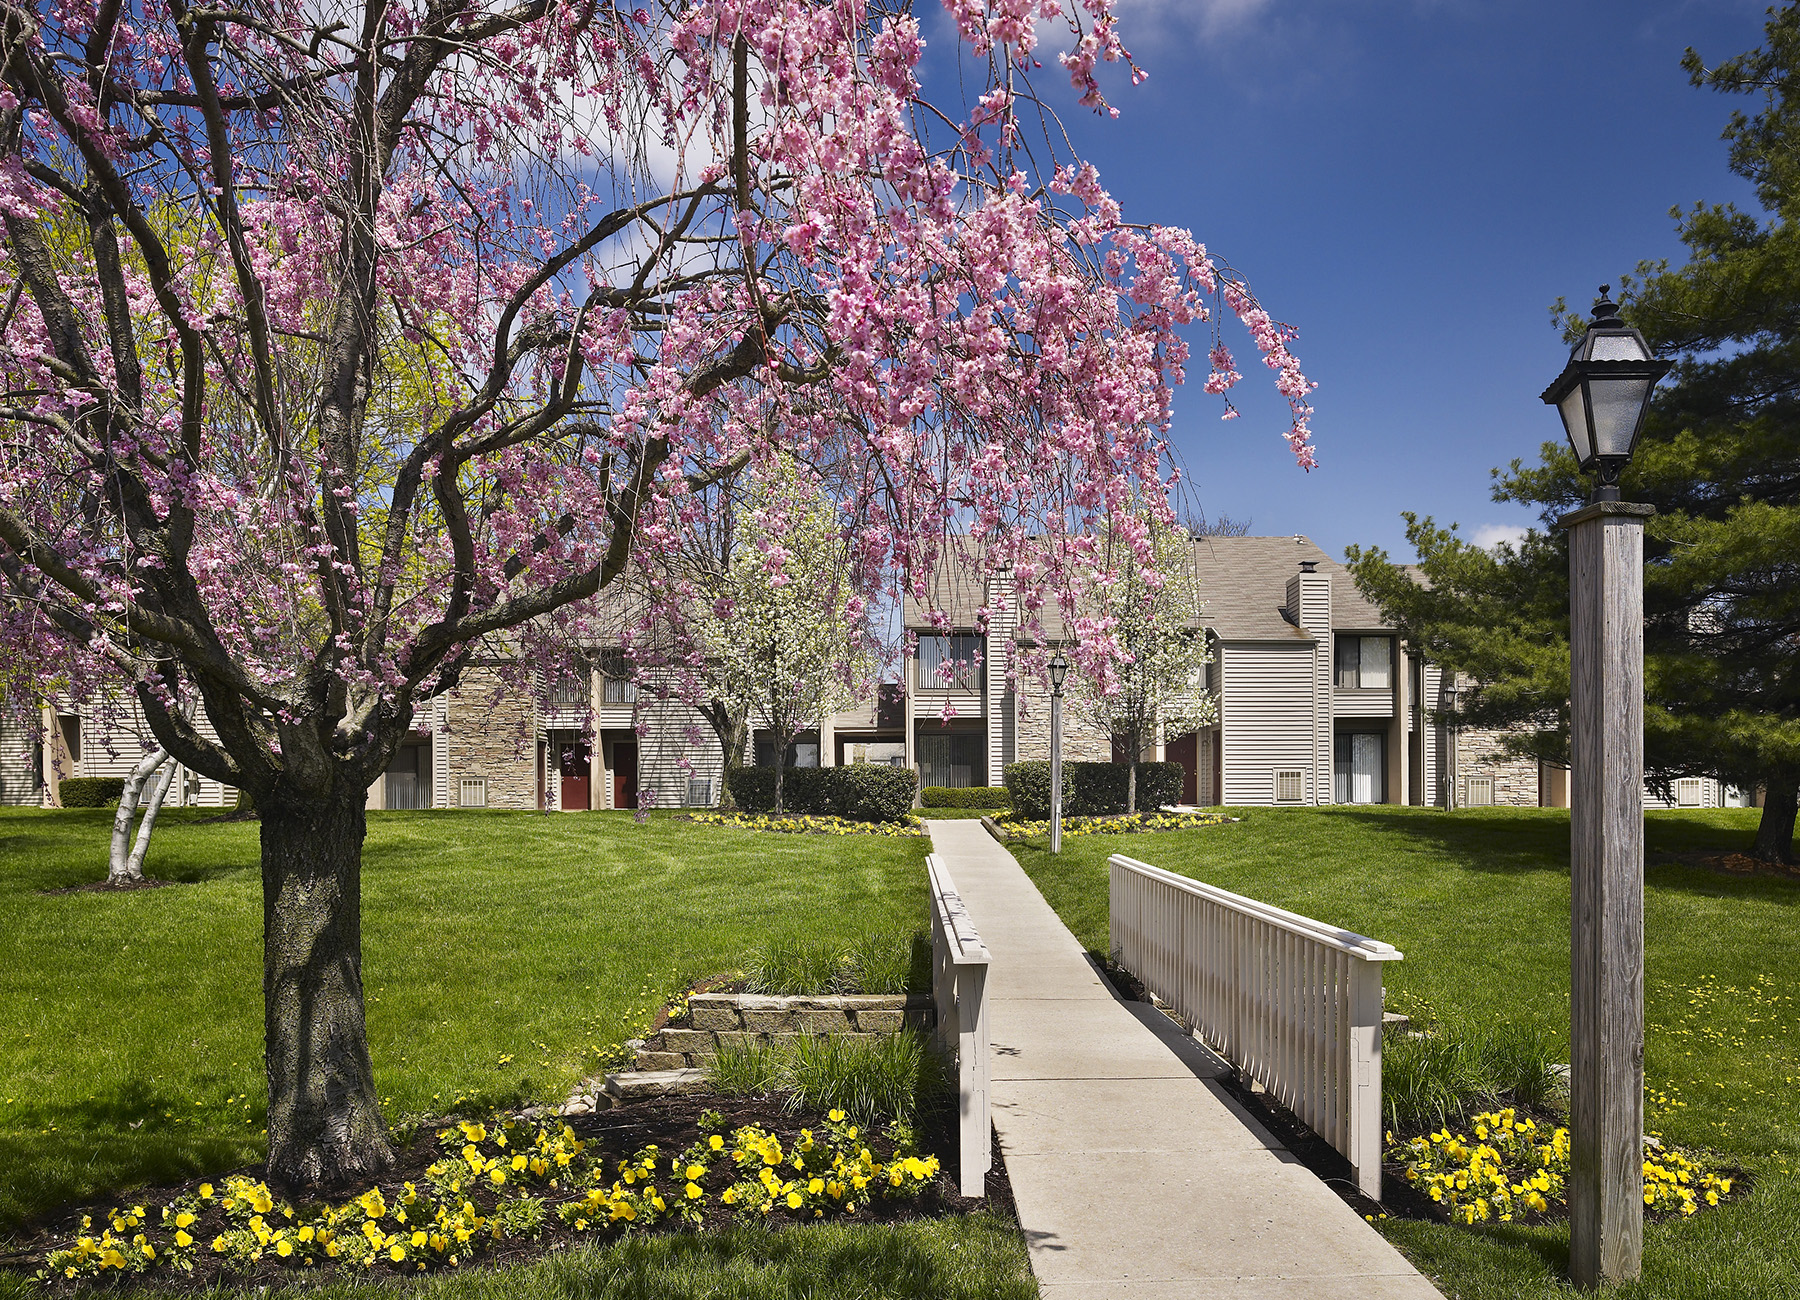 Exterior townhouse entrance with pink flowering tree in front